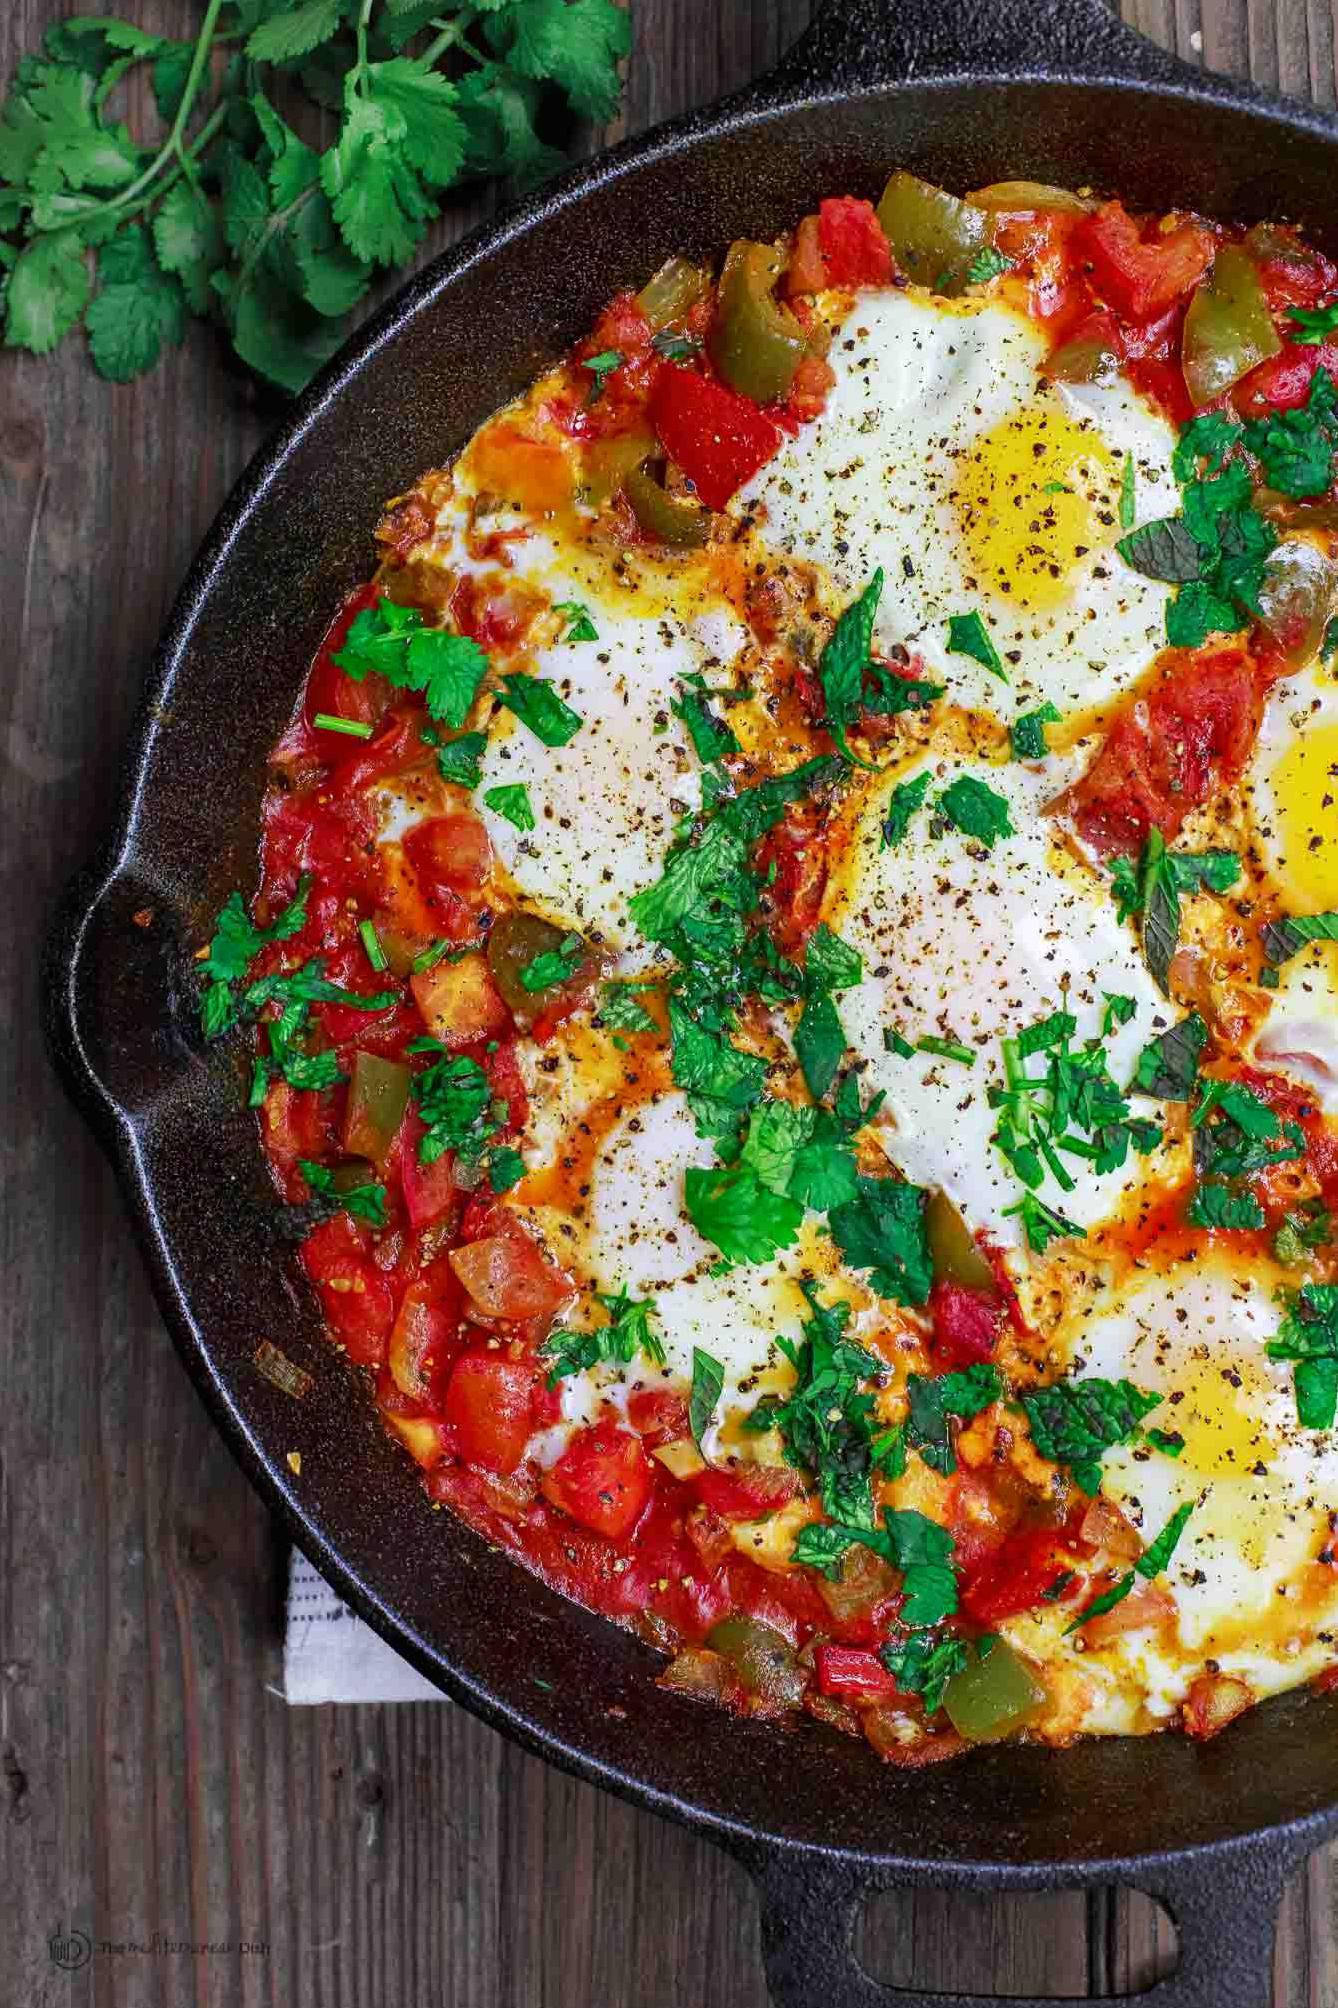  Perfectly poached eggs in a bed of tomato goodness